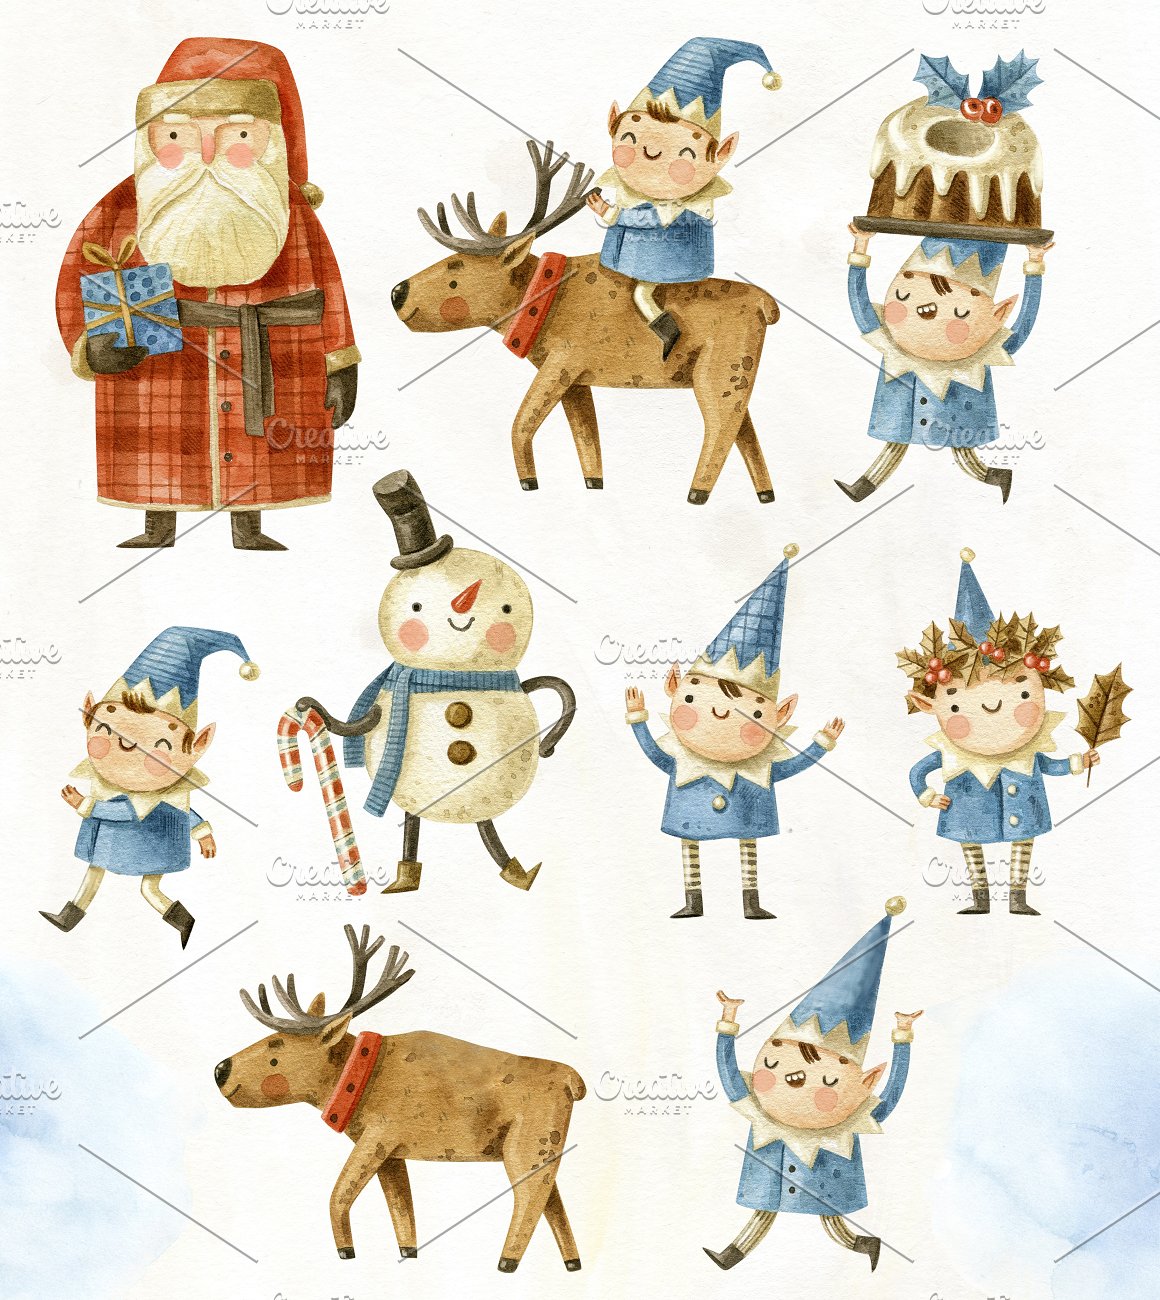 A set of different watercolor characters - santa, 6 elves, snowman and 2 reindeers on a watercolor background.